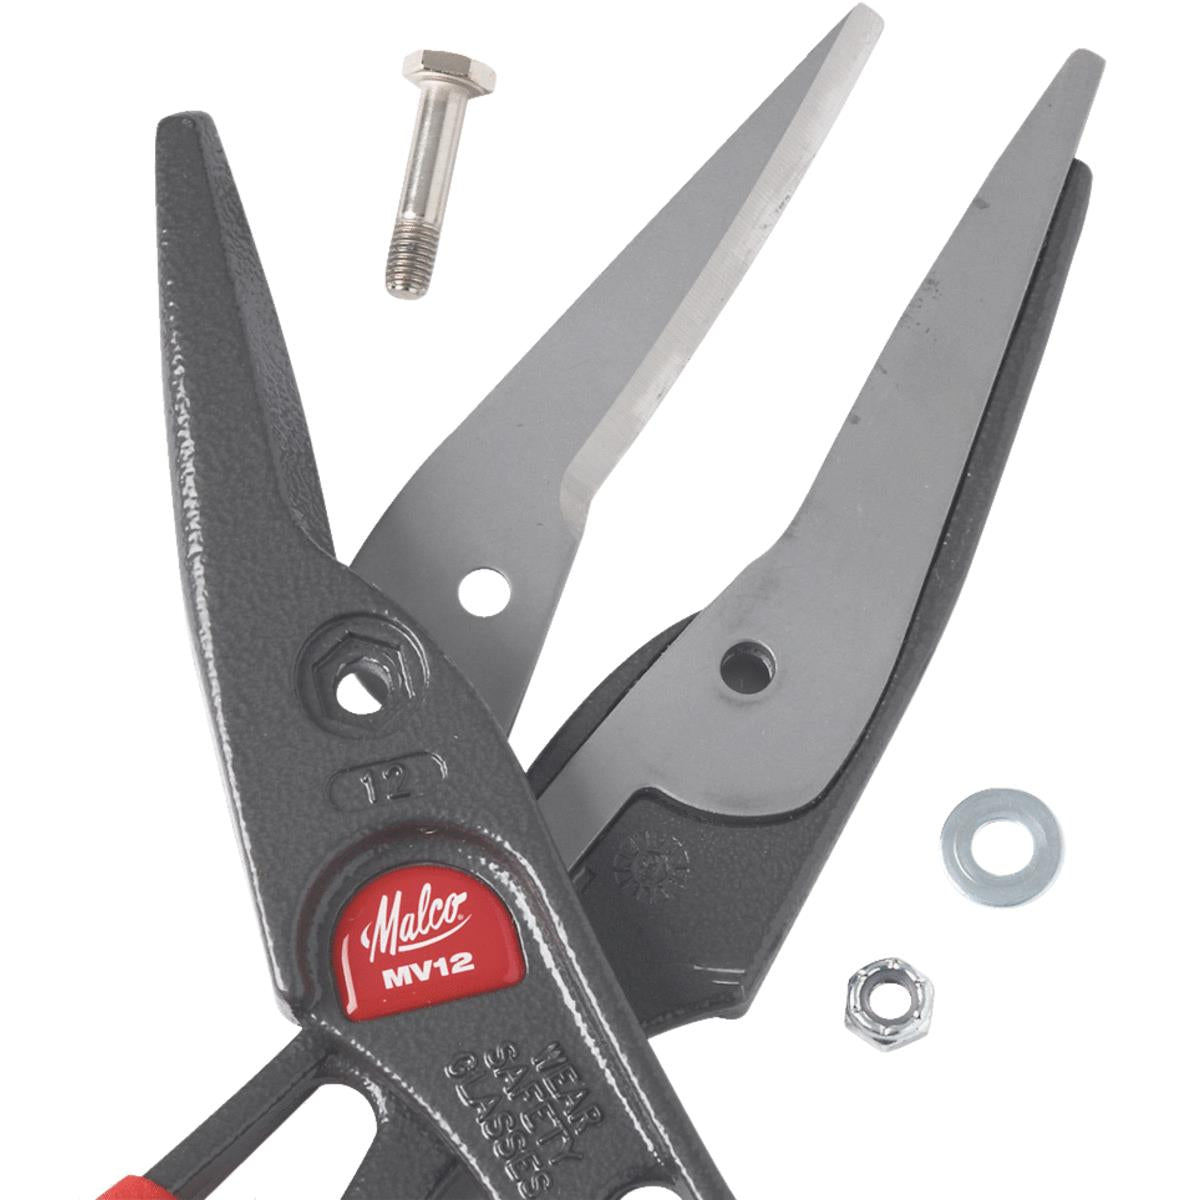 Malco MV12RB Carbon Steel Replacement Blades